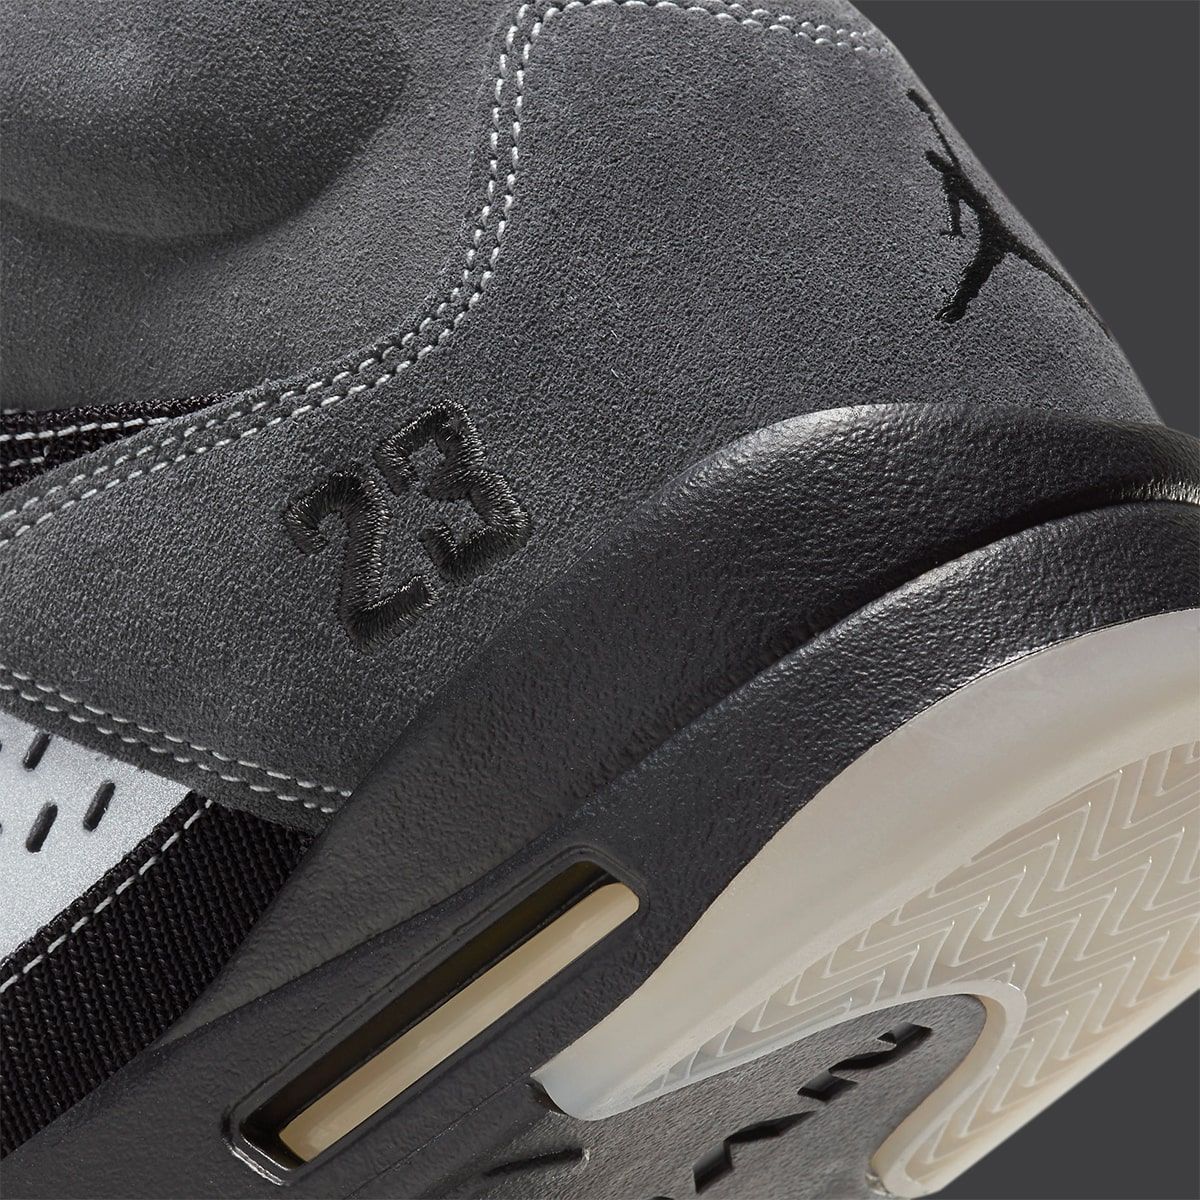 Where to Buy the Air Jordan 5 “Anthracite” | HOUSE OF HEAT